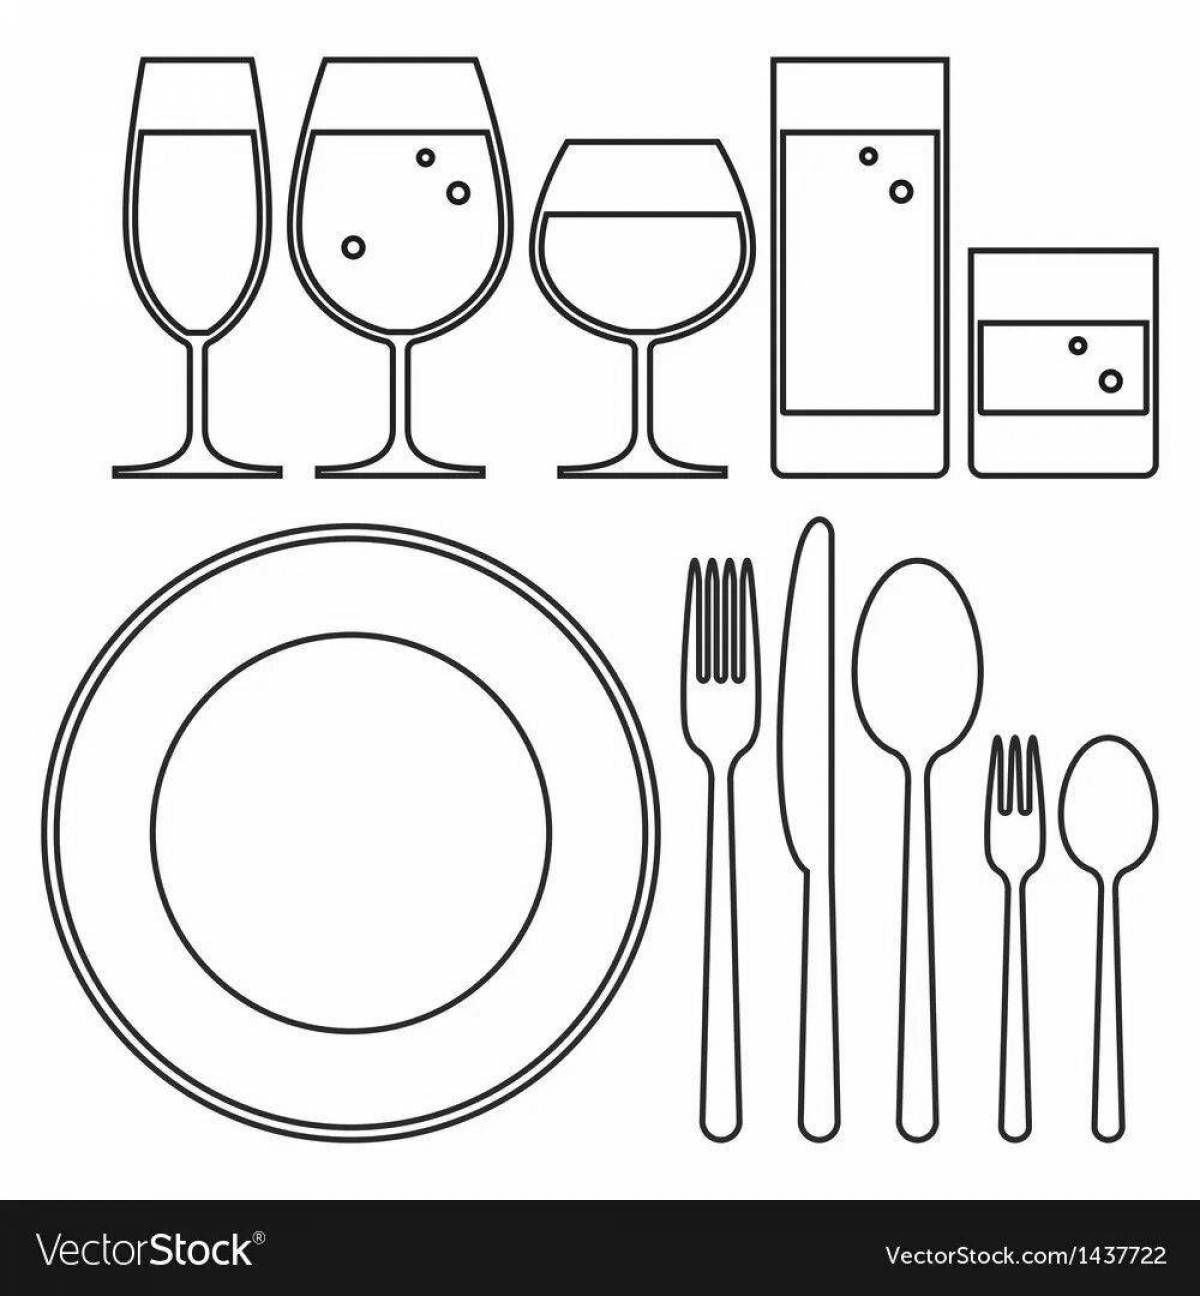 Charming table setting coloring book for kids